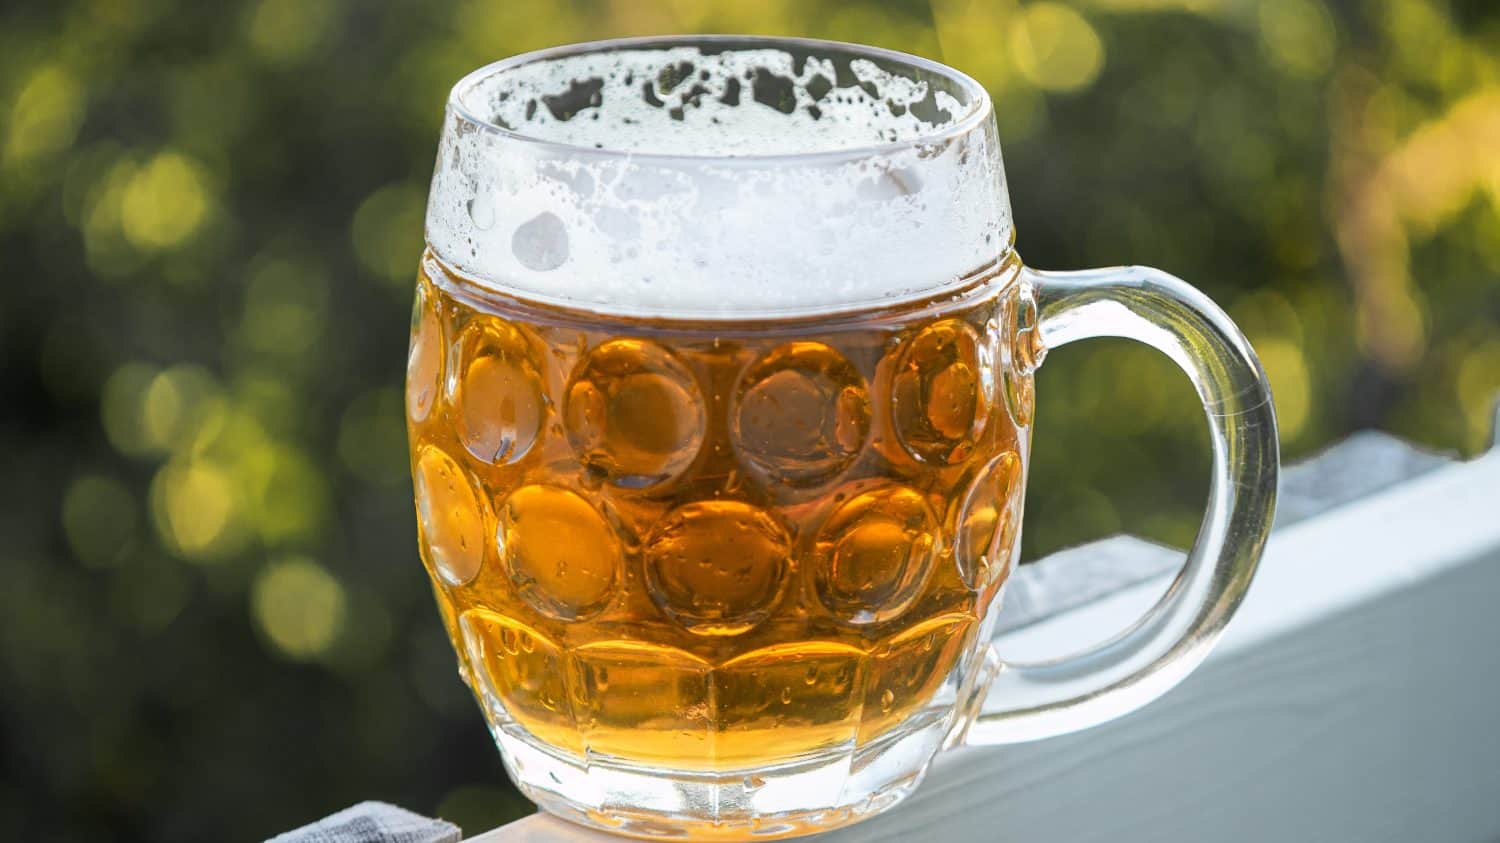 The sun shines on a pint of lager beer, poured into an ovally shaped beer glass with a handle. The gold and amber color of the beer makes a brilliant contrast to the white foam up top.